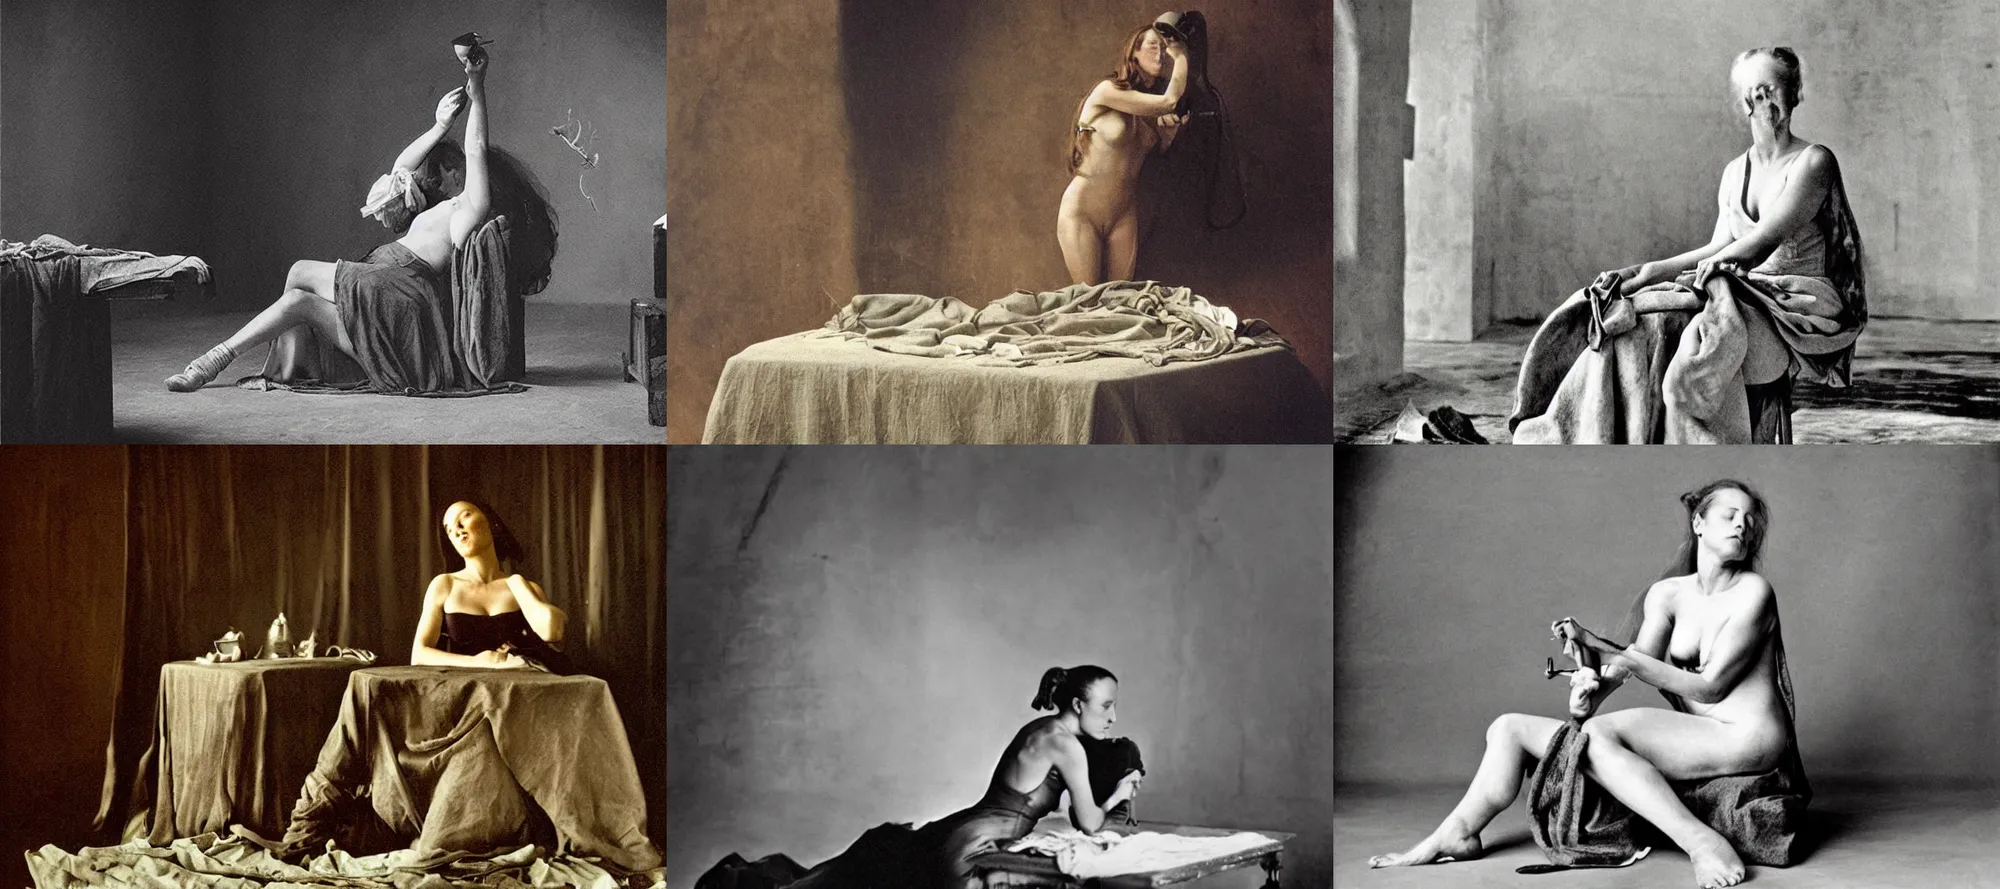 Prompt: picture by annie leibovitz of a woman sewing, in the style of marquis de sade